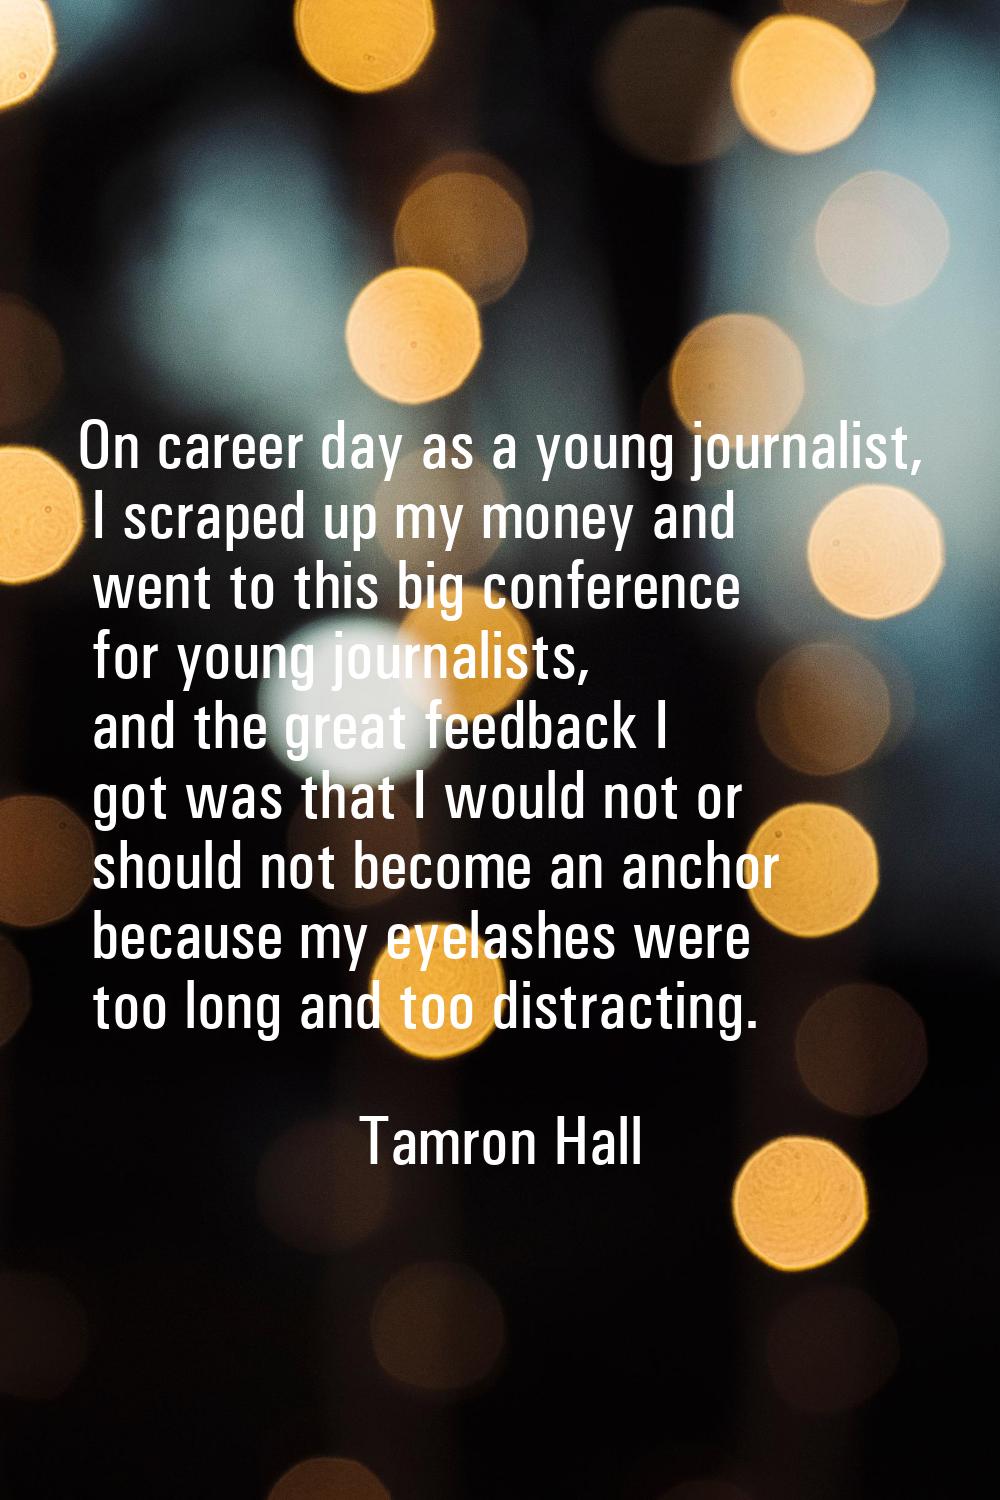 On career day as a young journalist, I scraped up my money and went to this big conference for youn